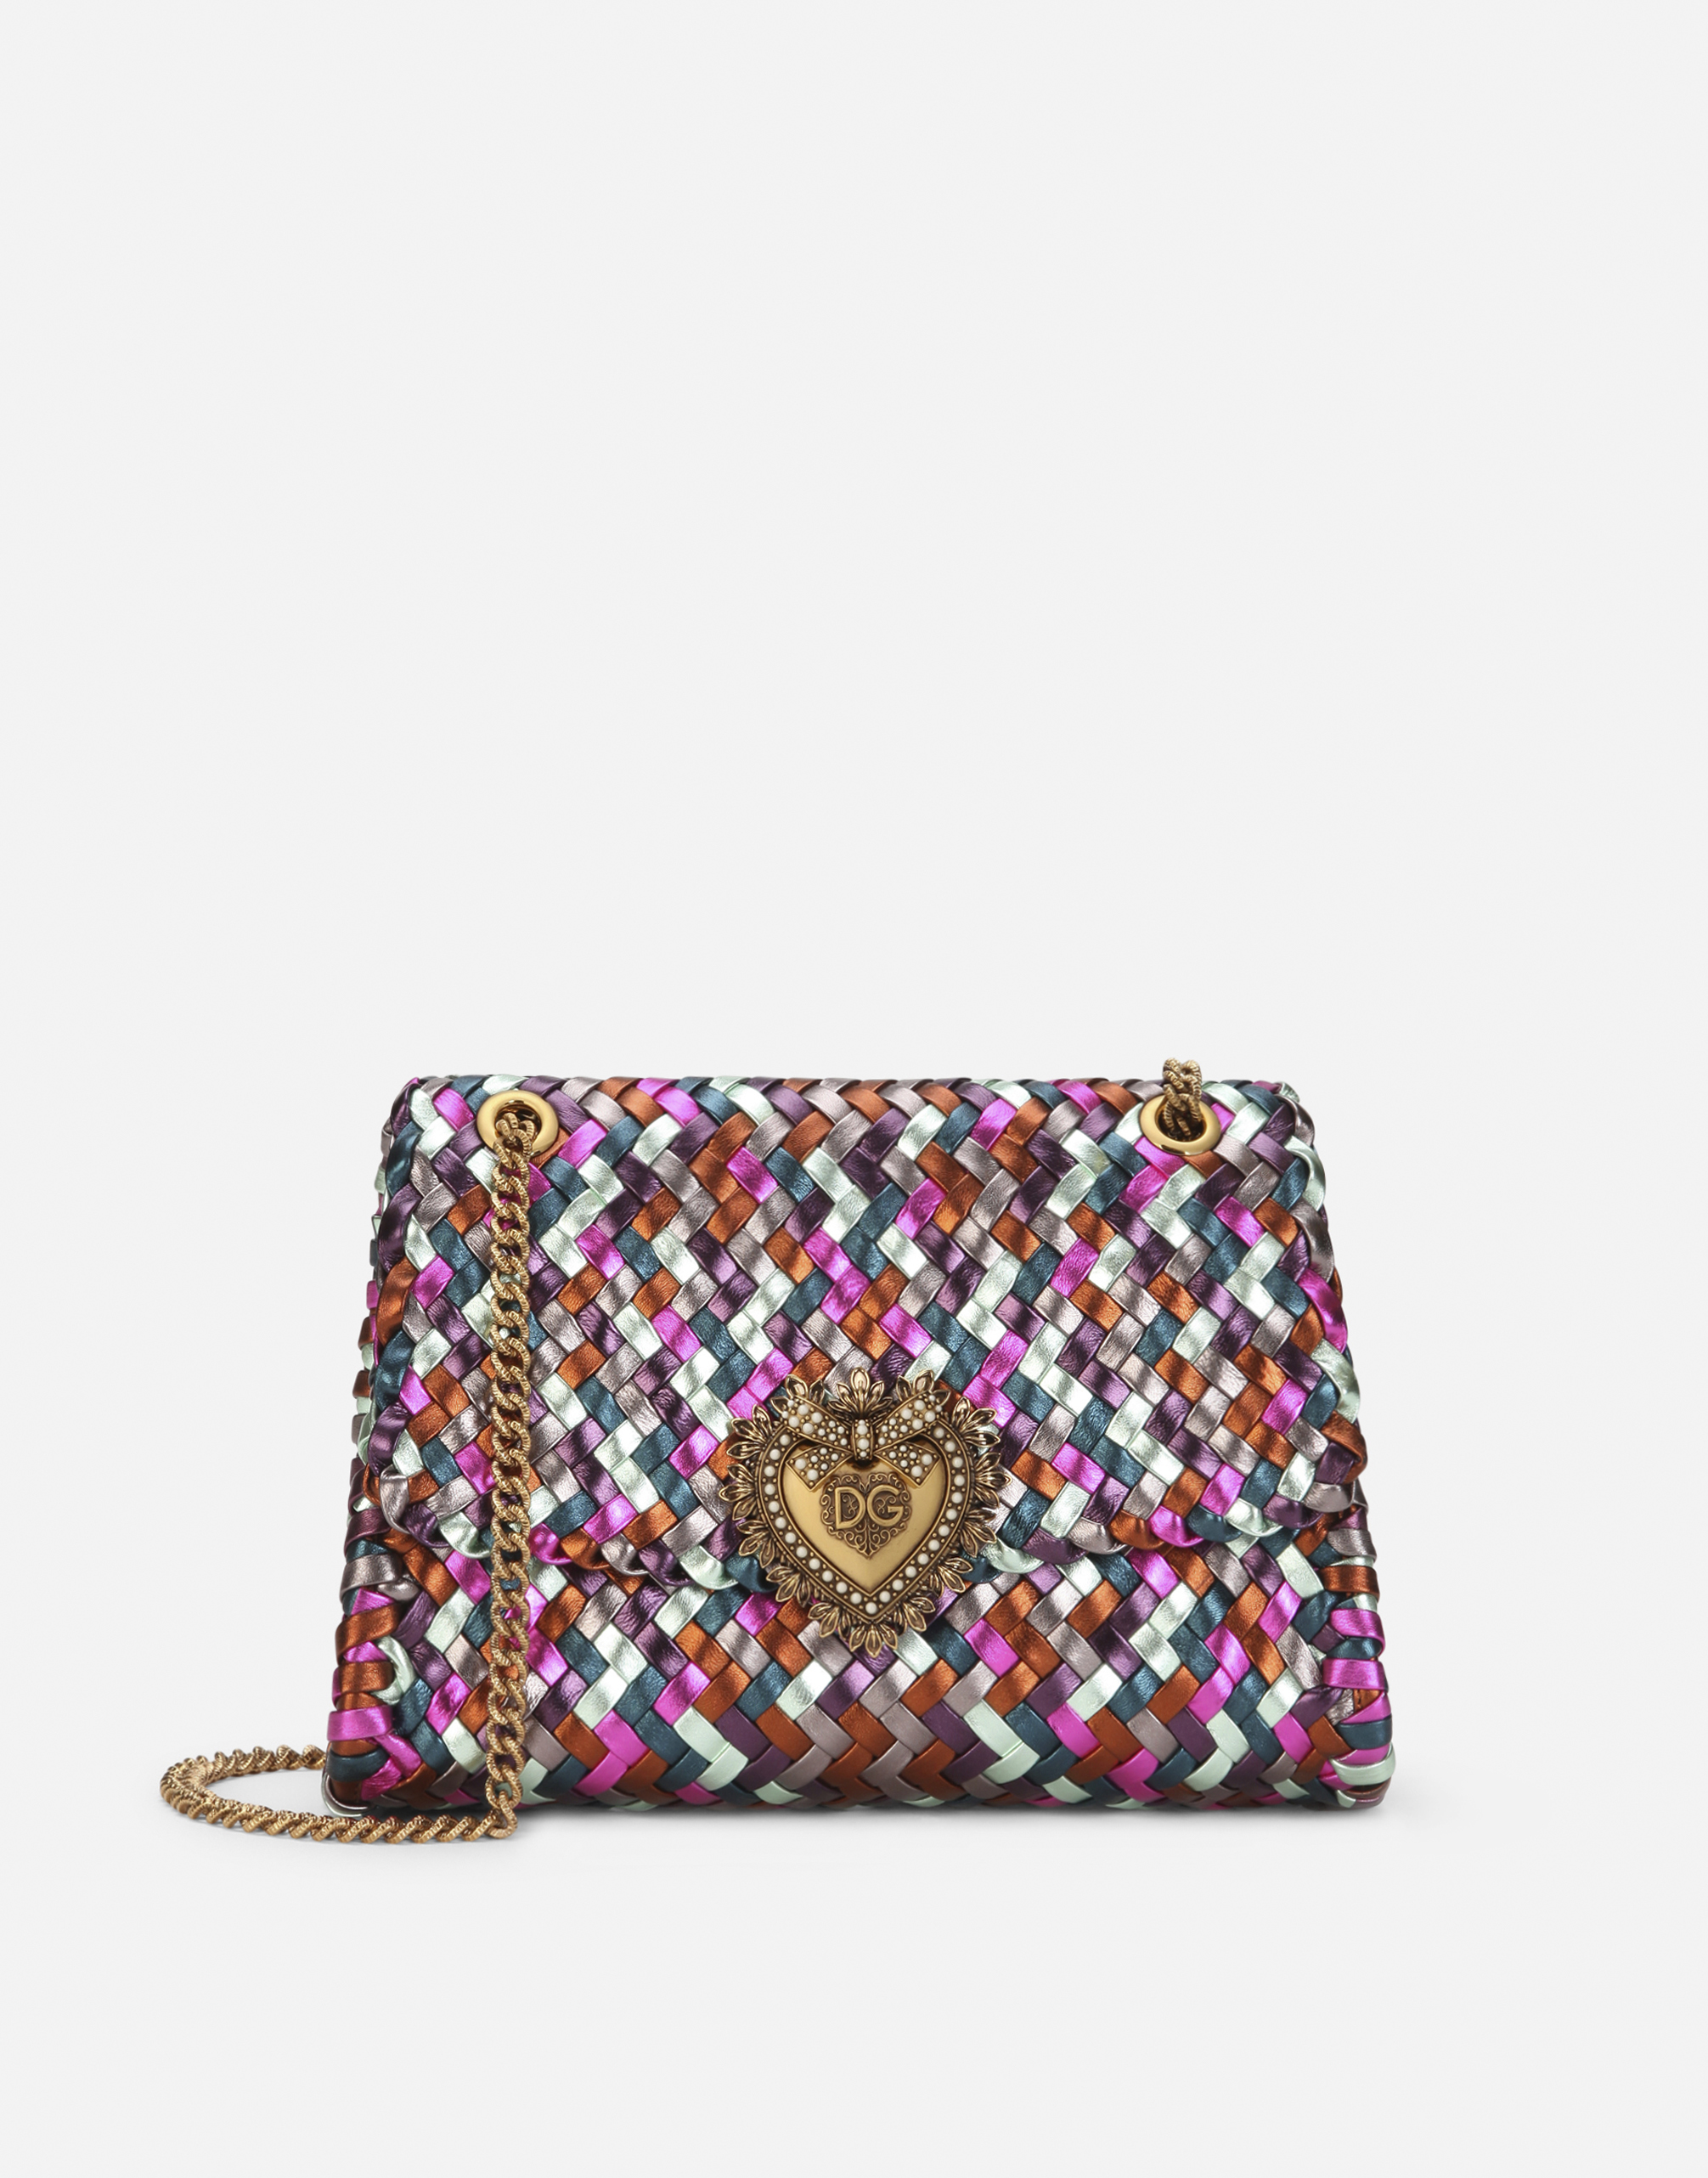 Large Devotion shoulder bag in multi-colored foiled woven nappa leather in Multicolor